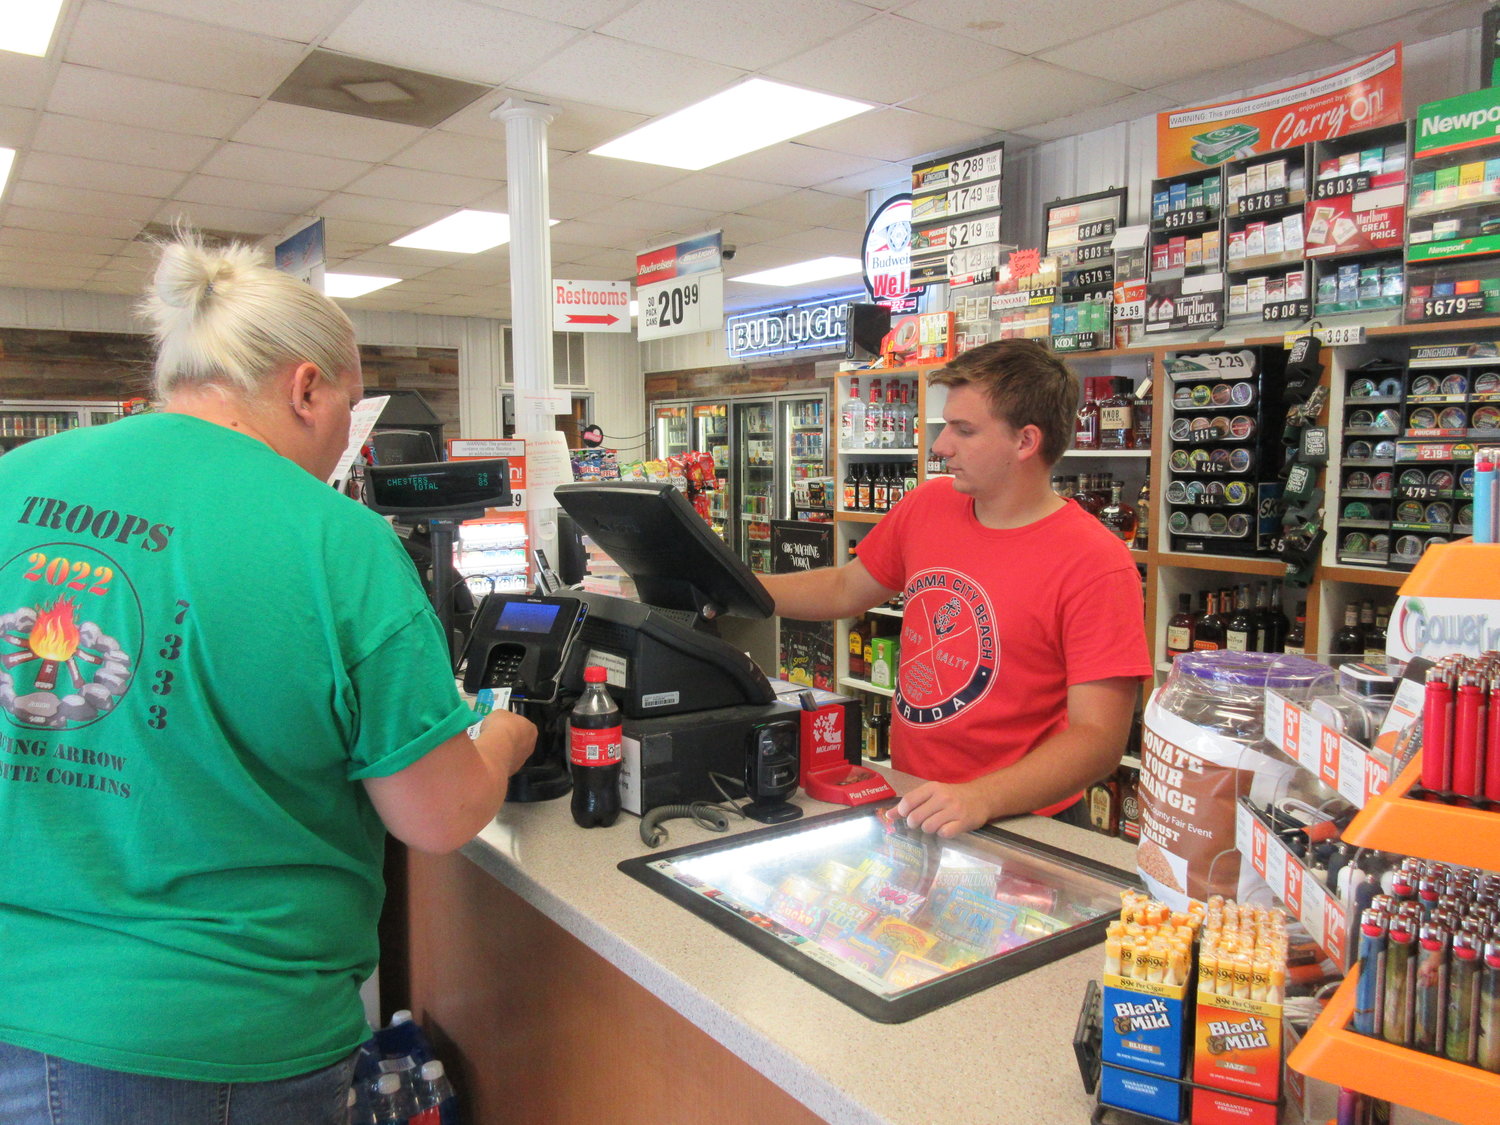 Vienna Quik Spot worker, Caleb Horman, assists a customer with her purchase.